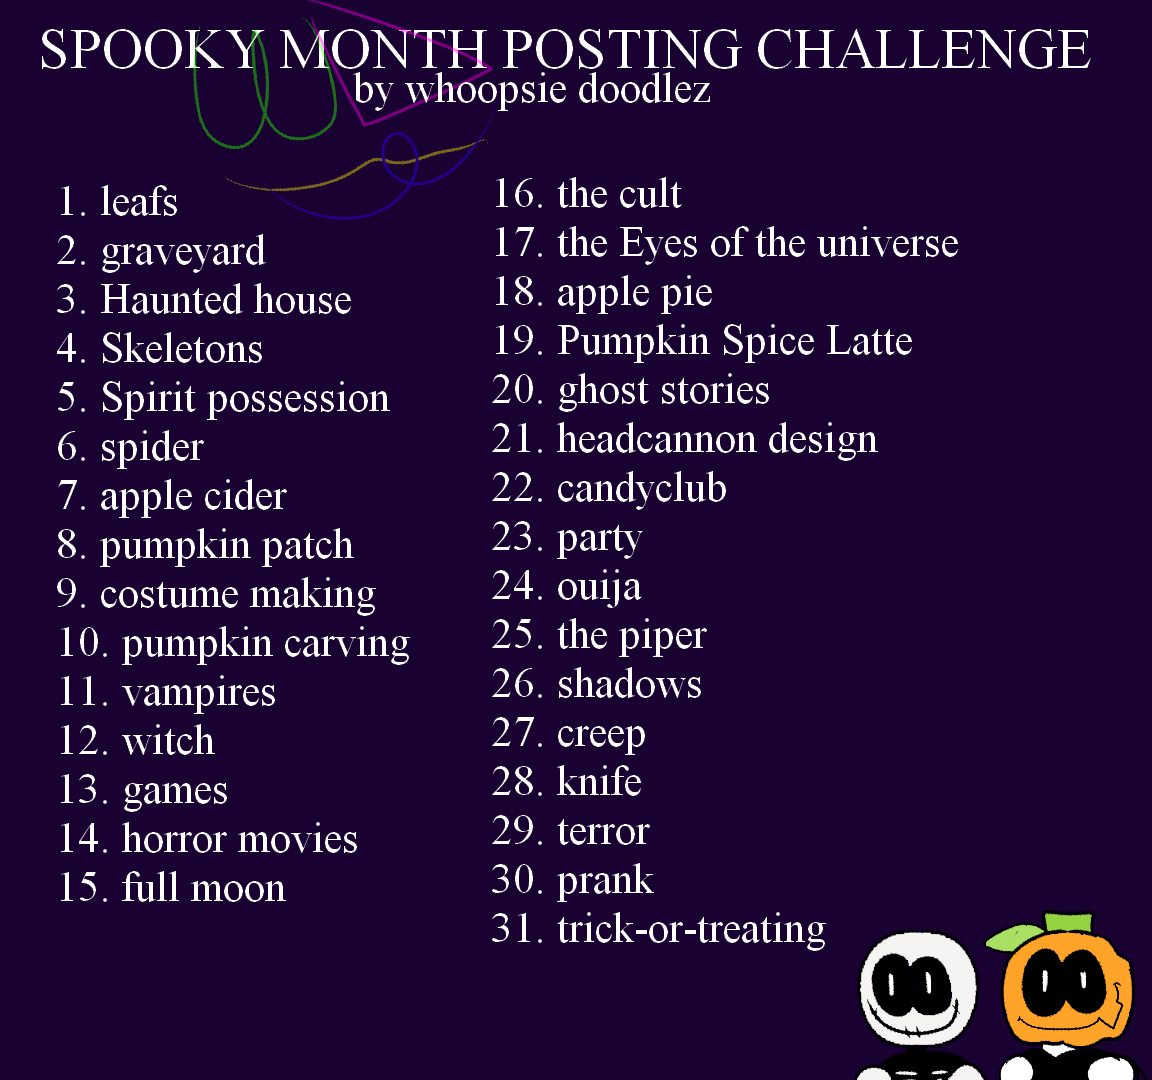 An idea for spooky month 6